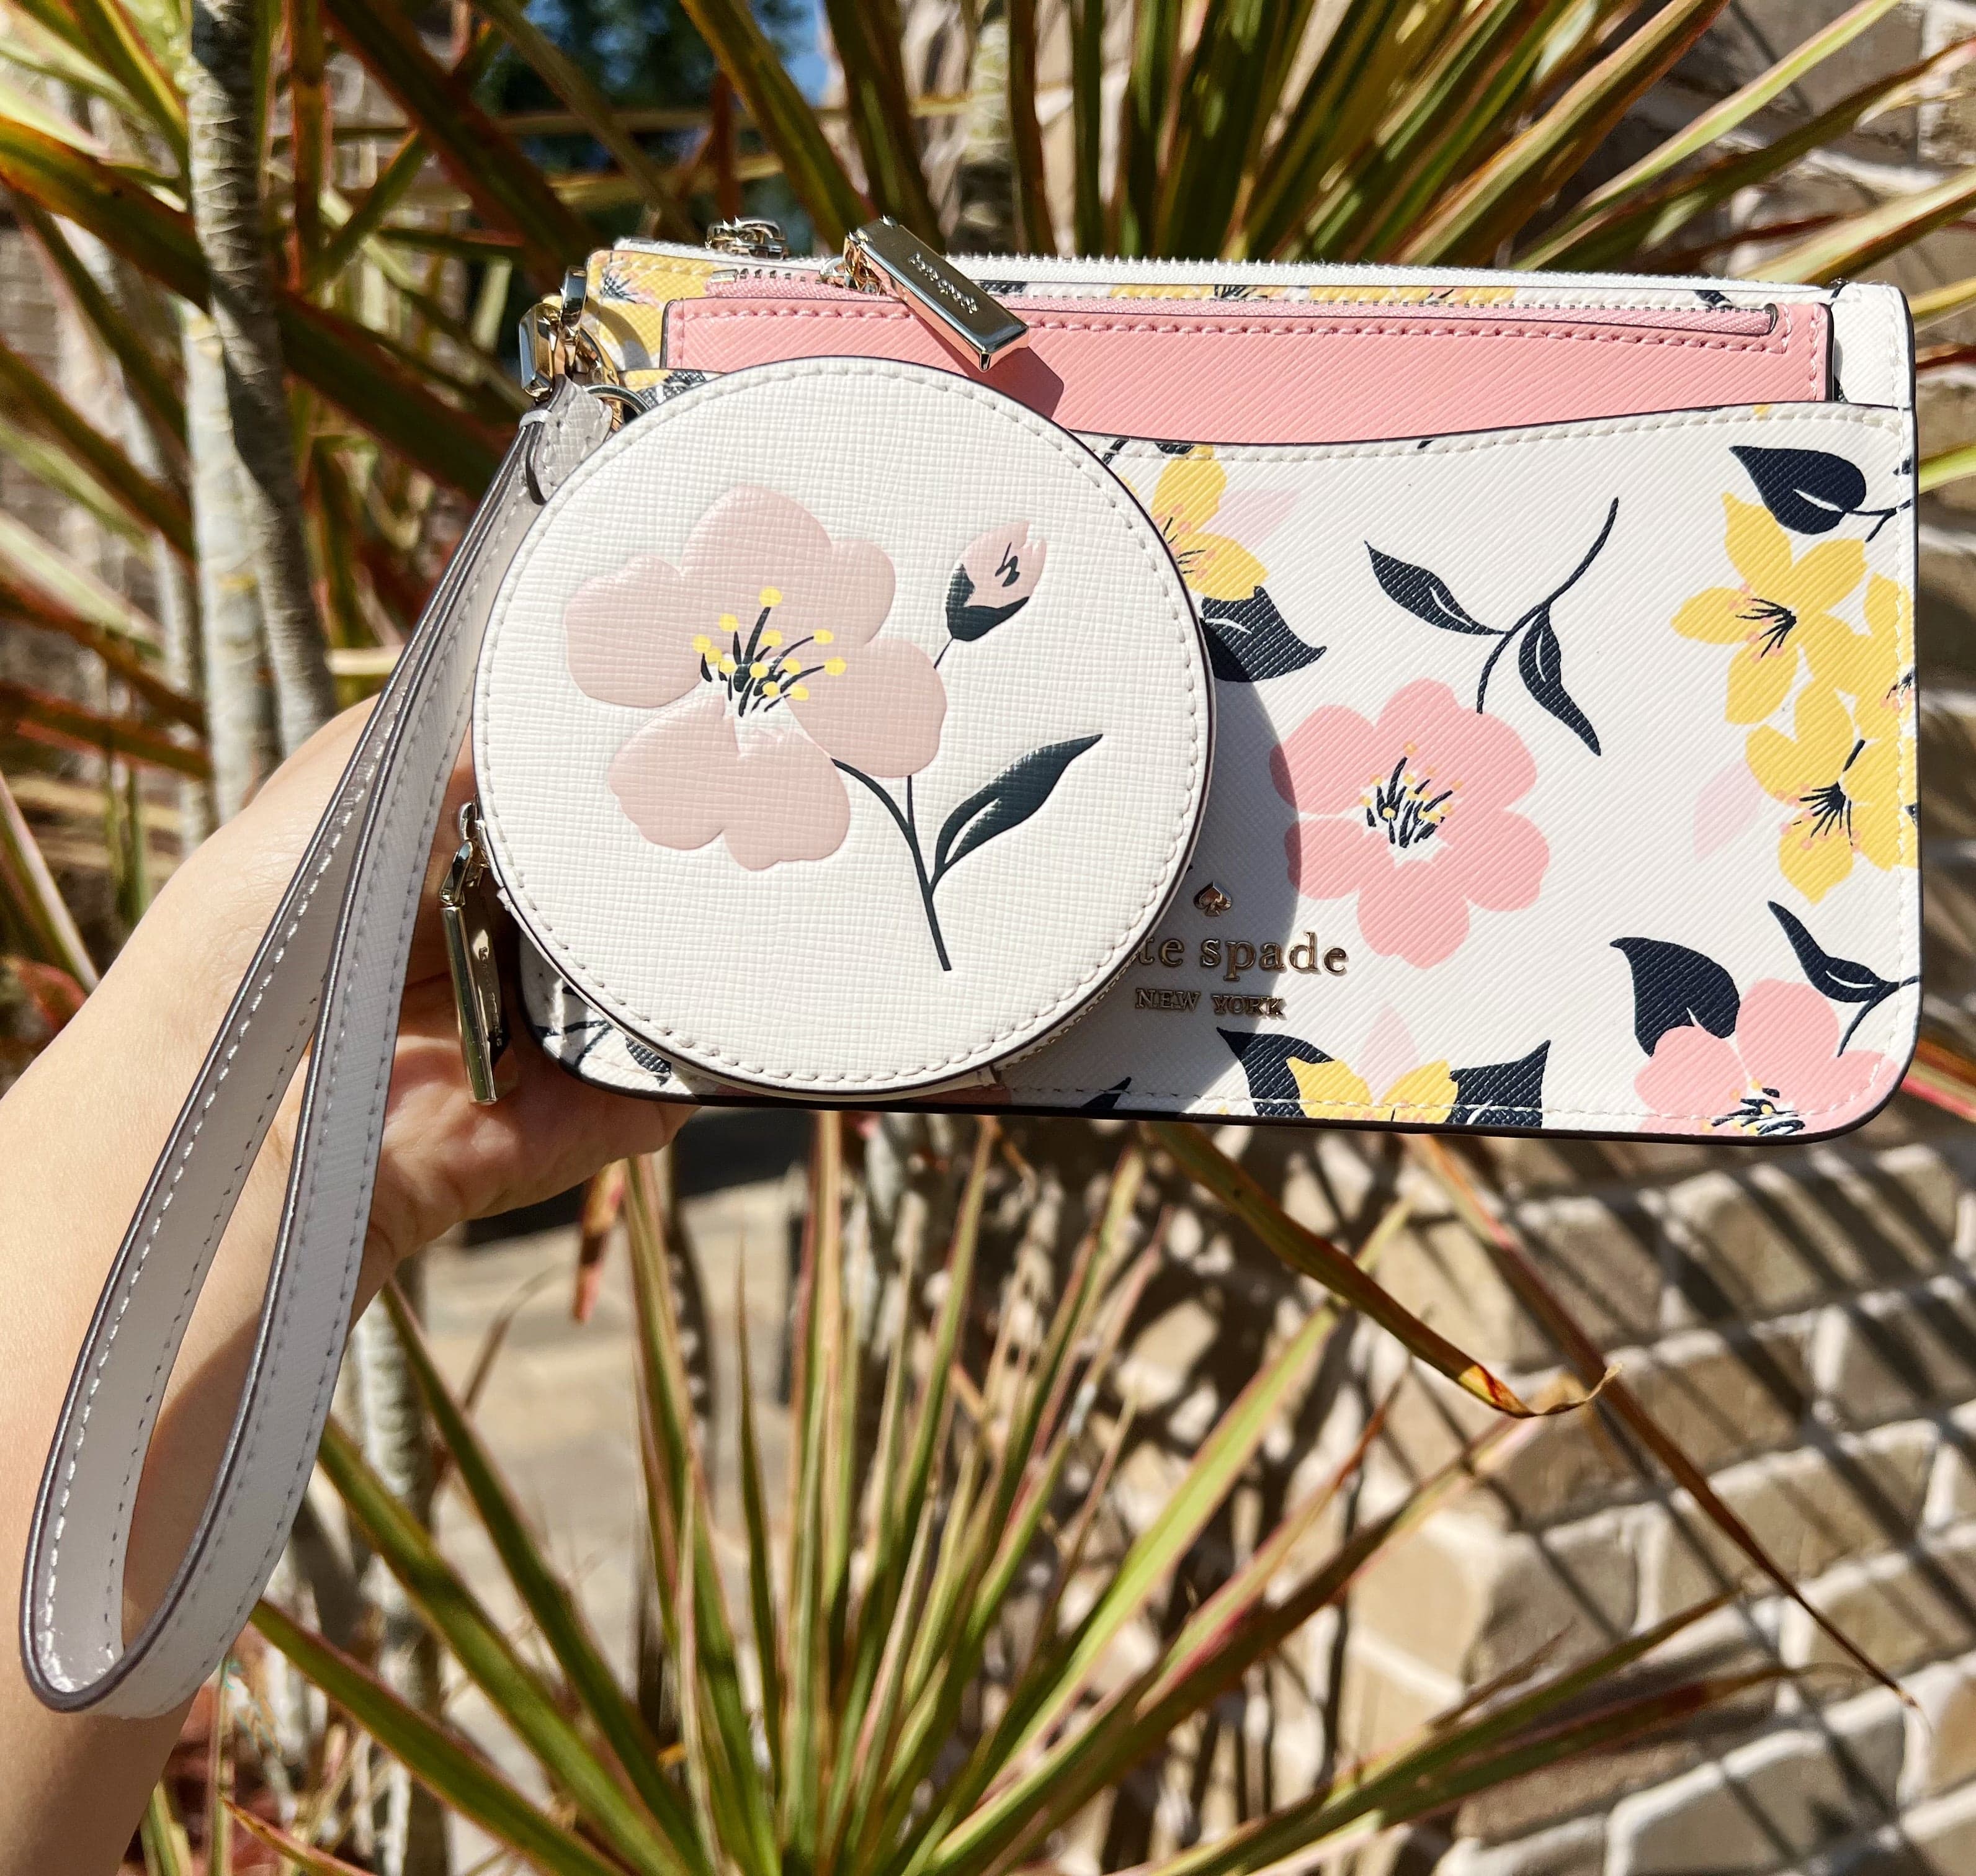 Kate Spade Staci Lily Blooms Large Continental Wallet